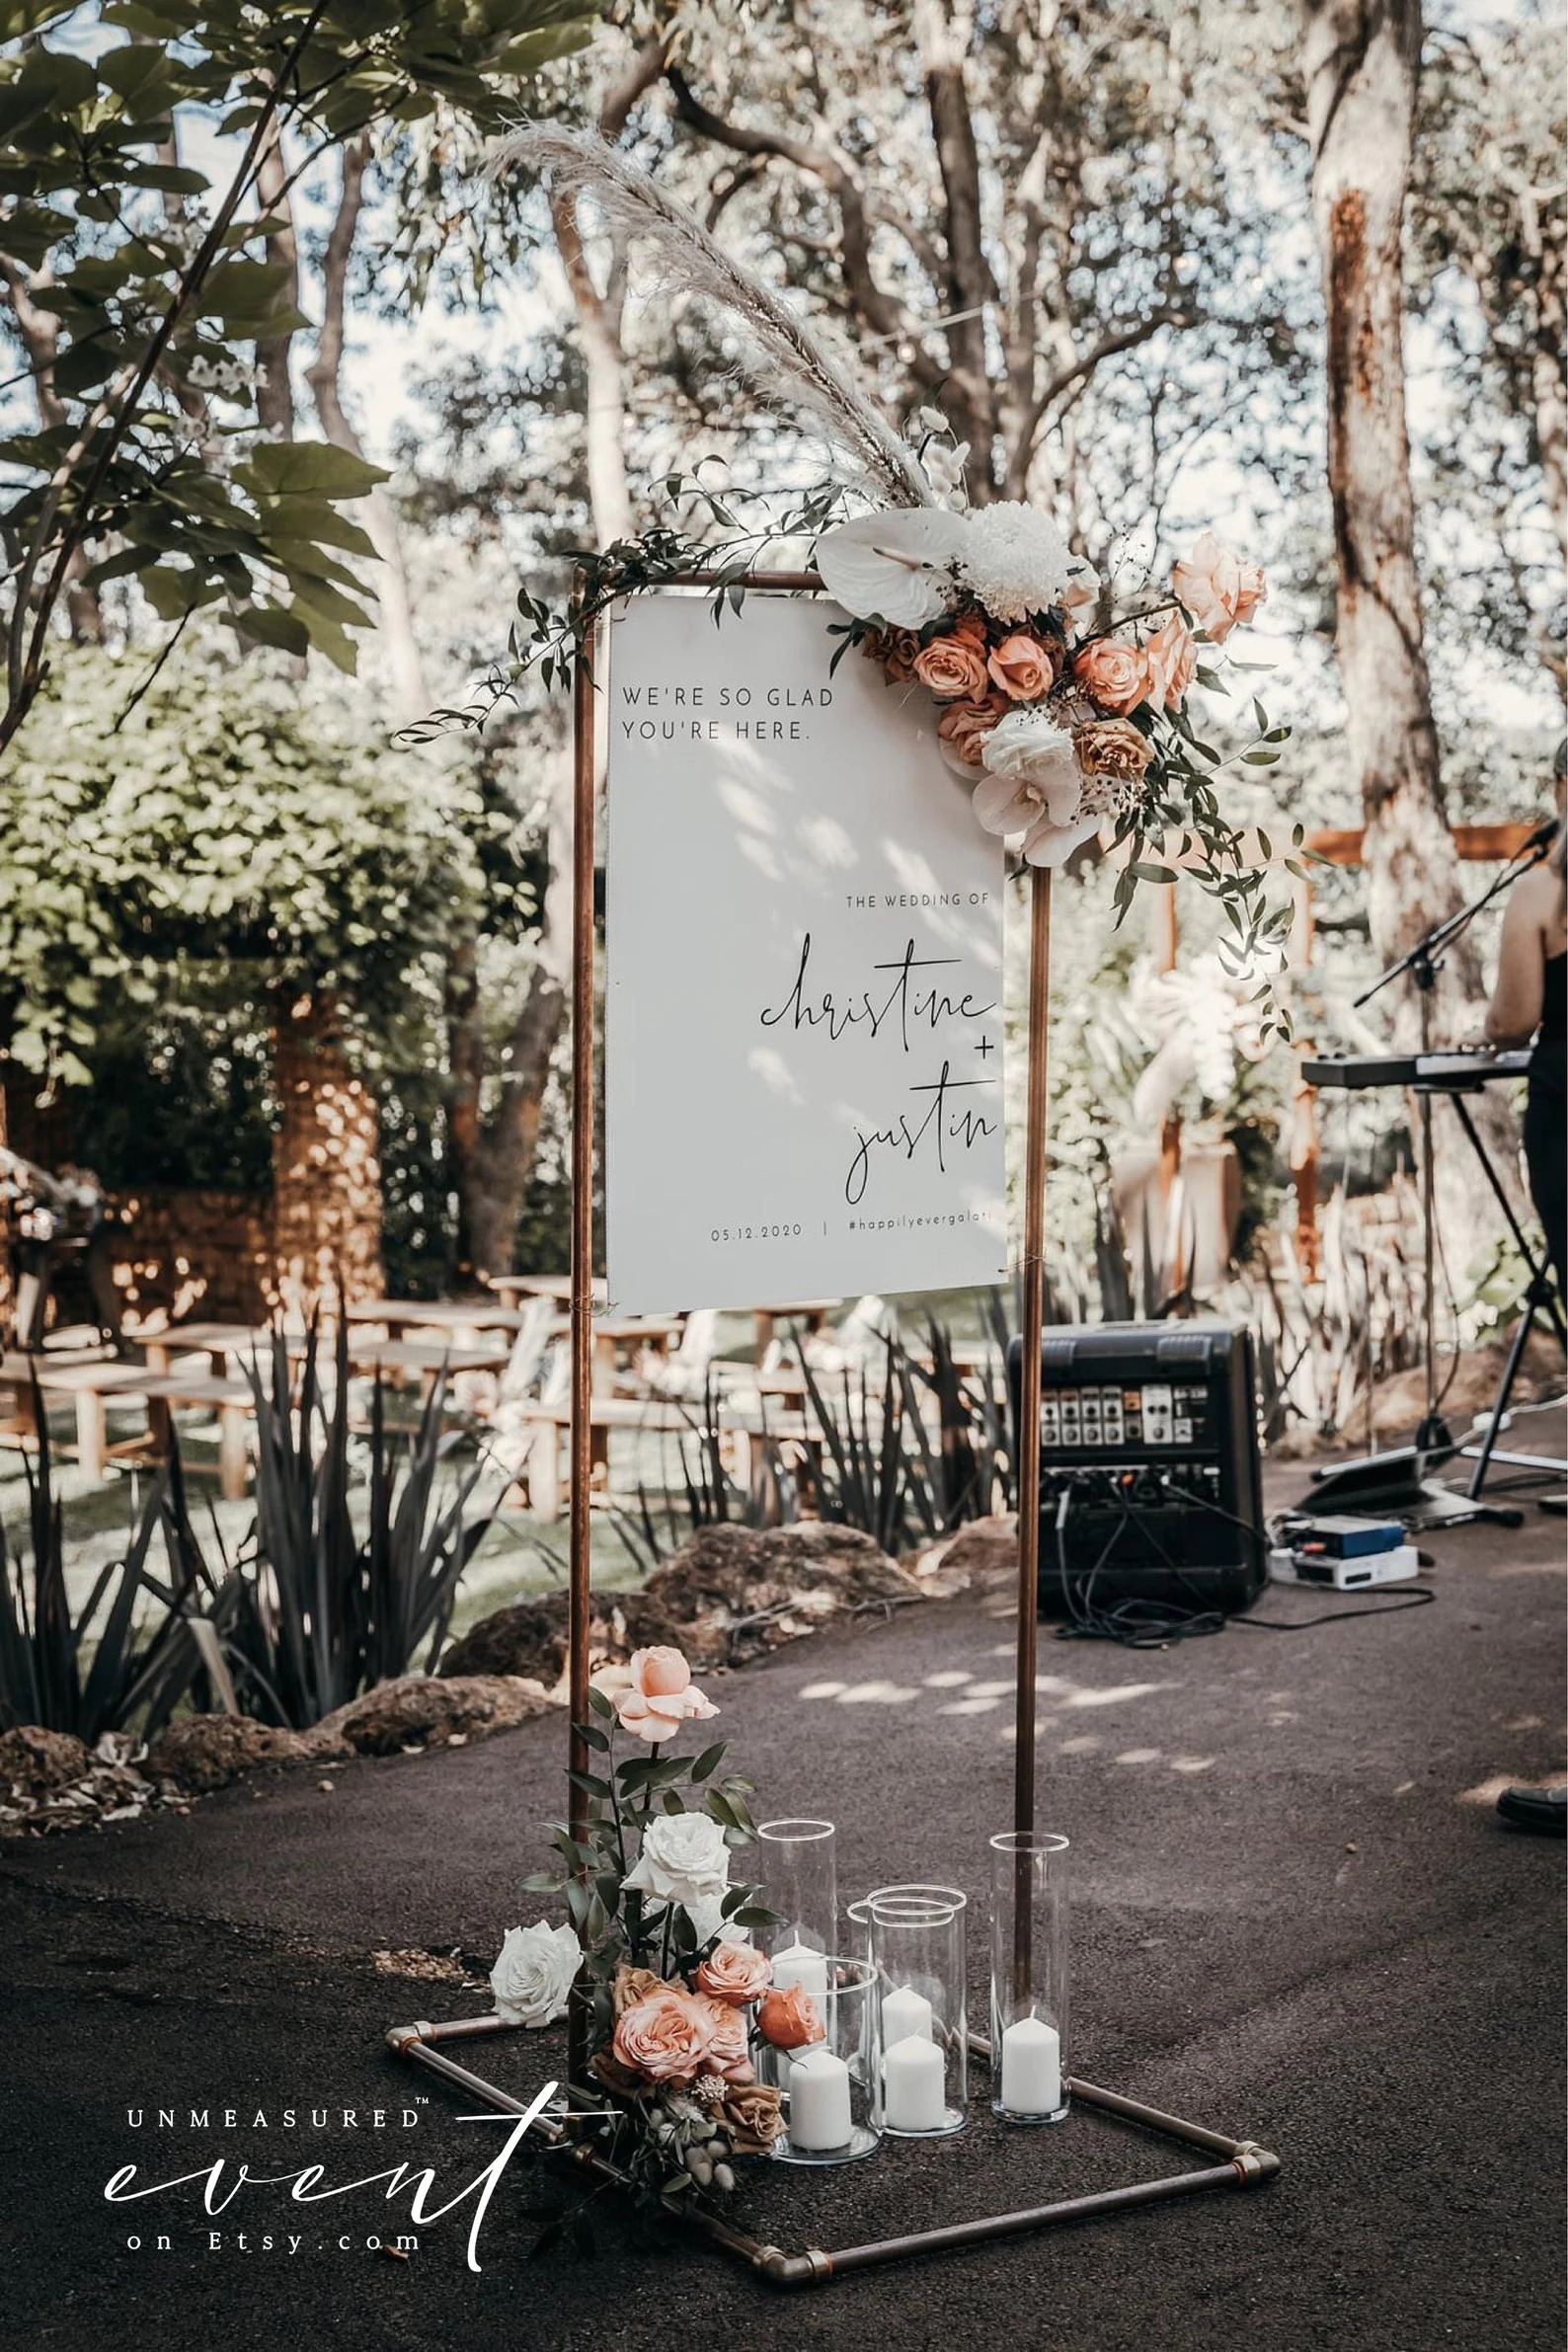 15 Delightful Wedding Welcome Sign Designs That Will Greet Your Guests